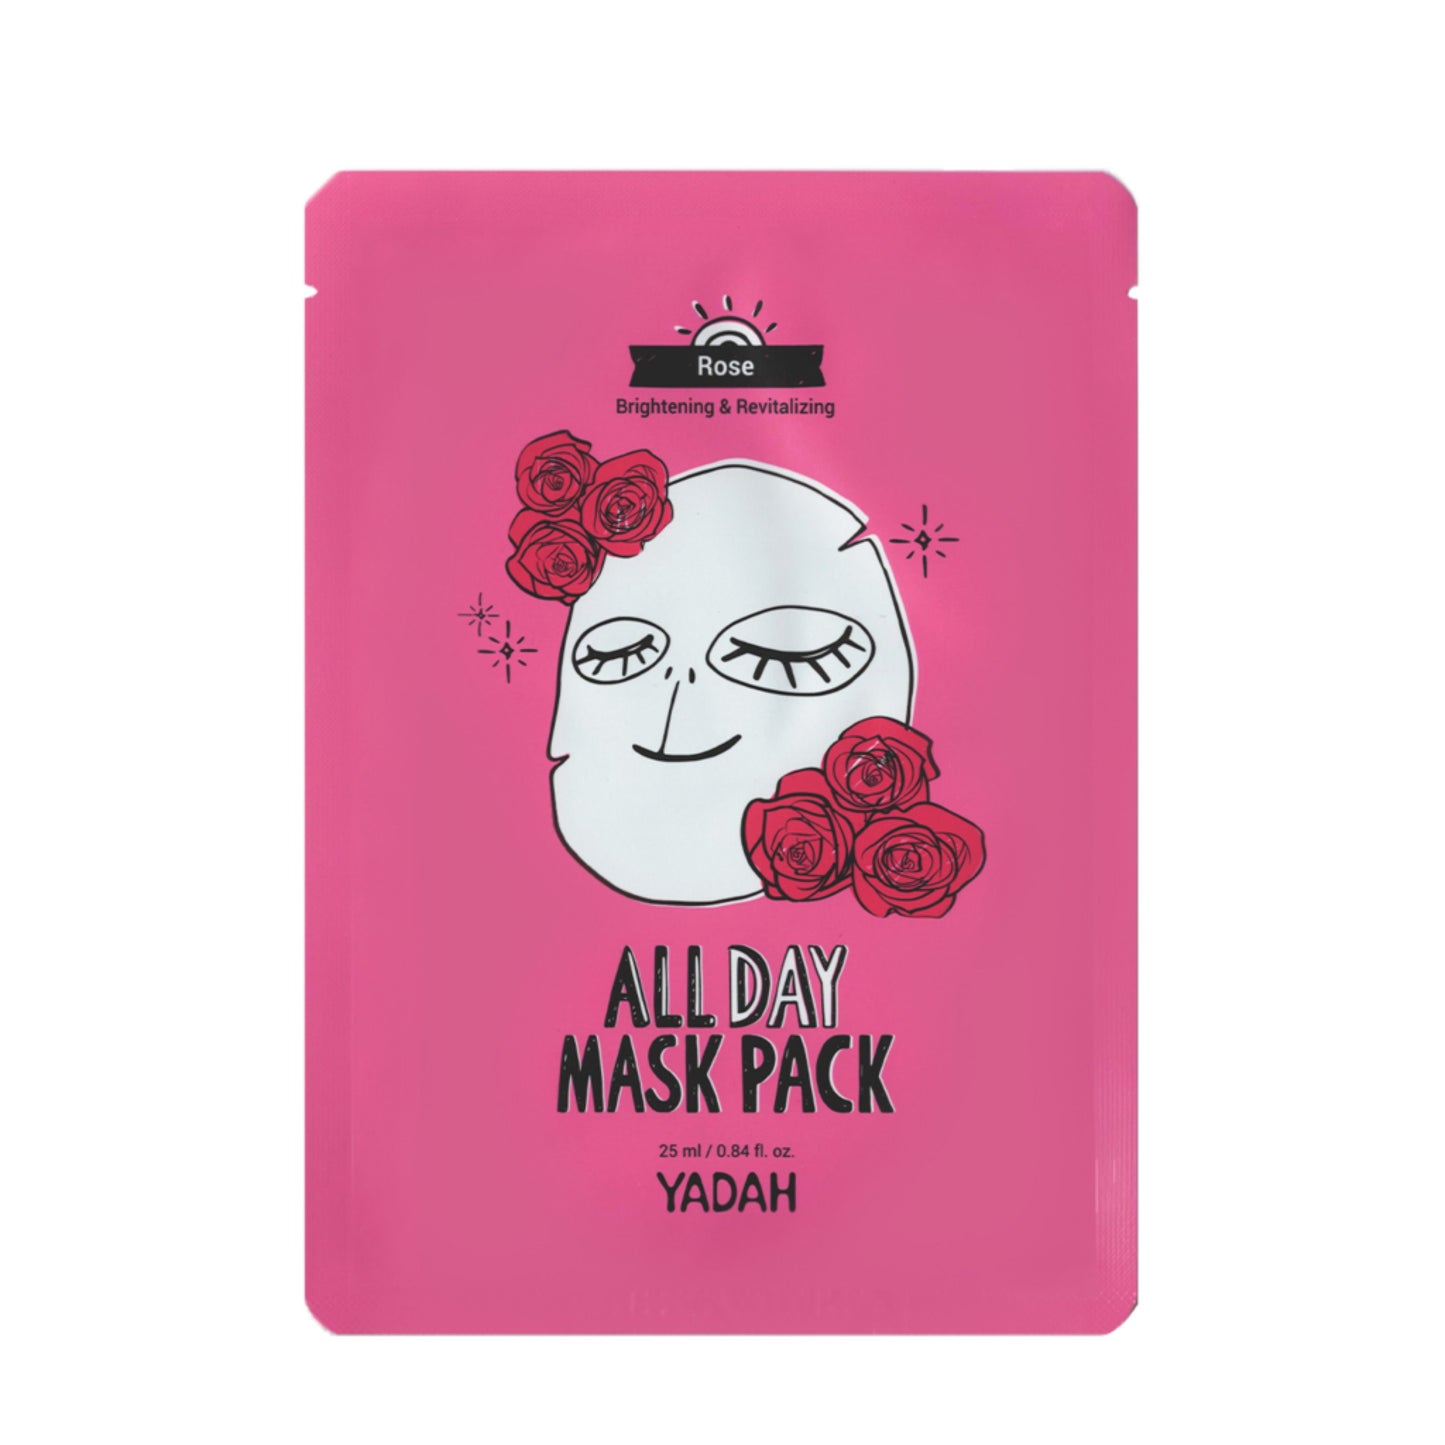 Yadah All Day Mask (6739179831343)